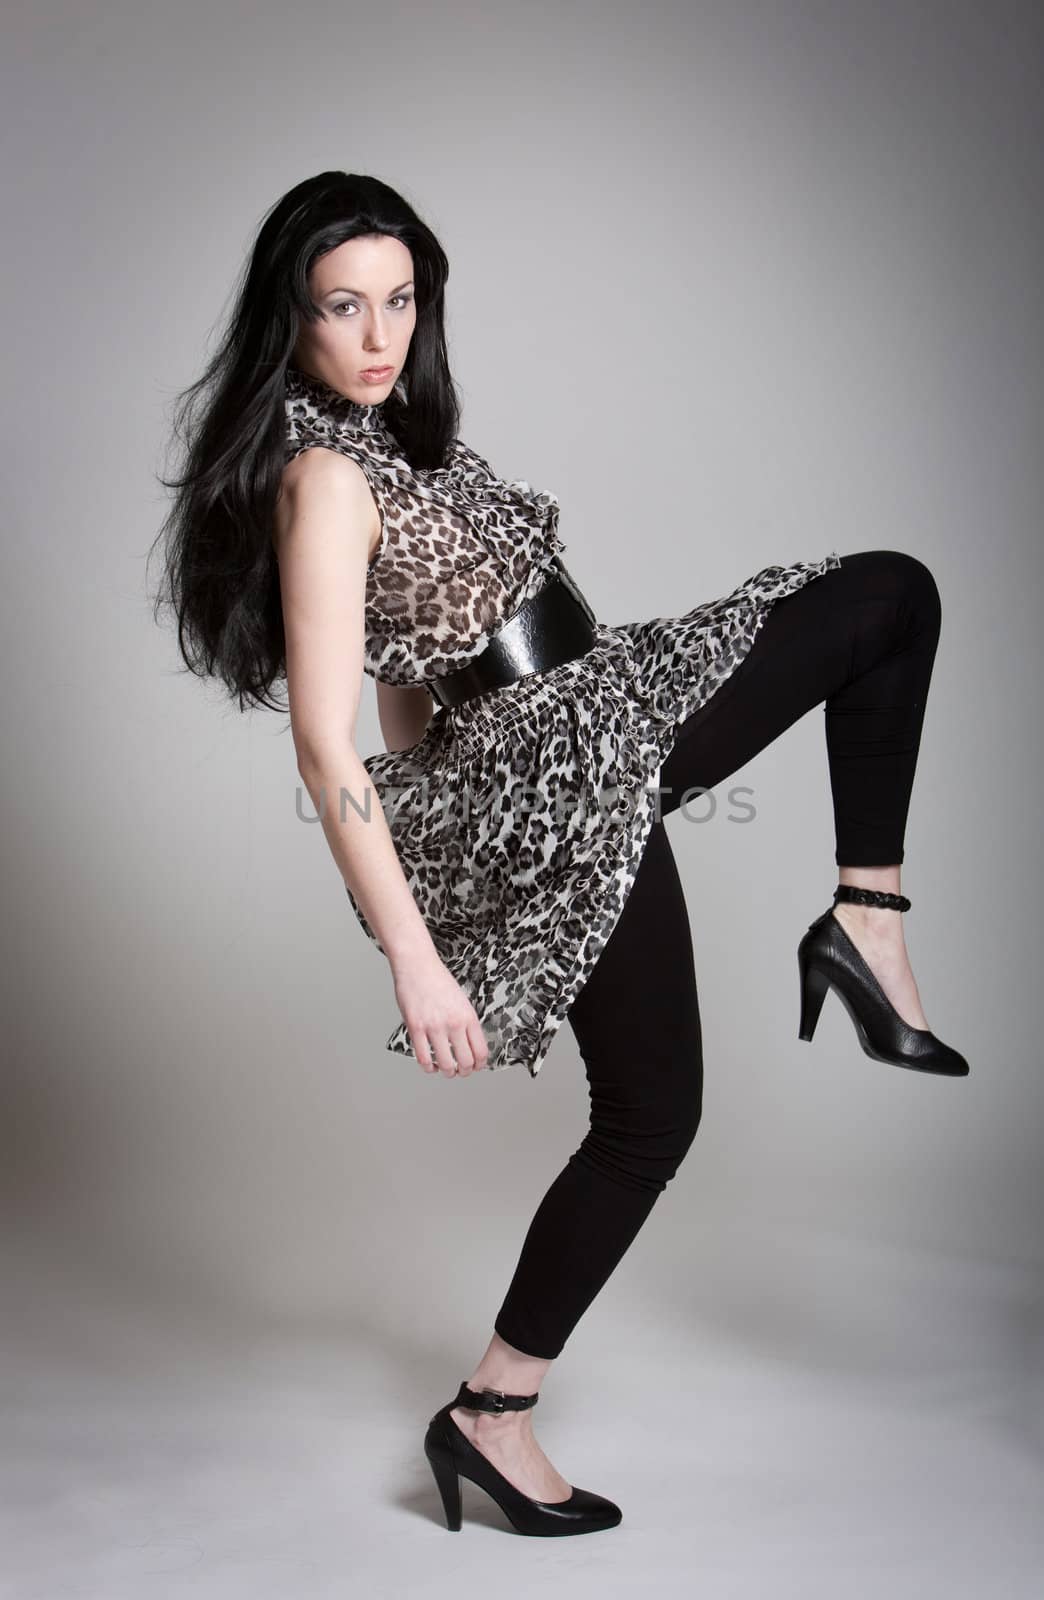 Beautiful black haired woman in fashionable outfit and high heels